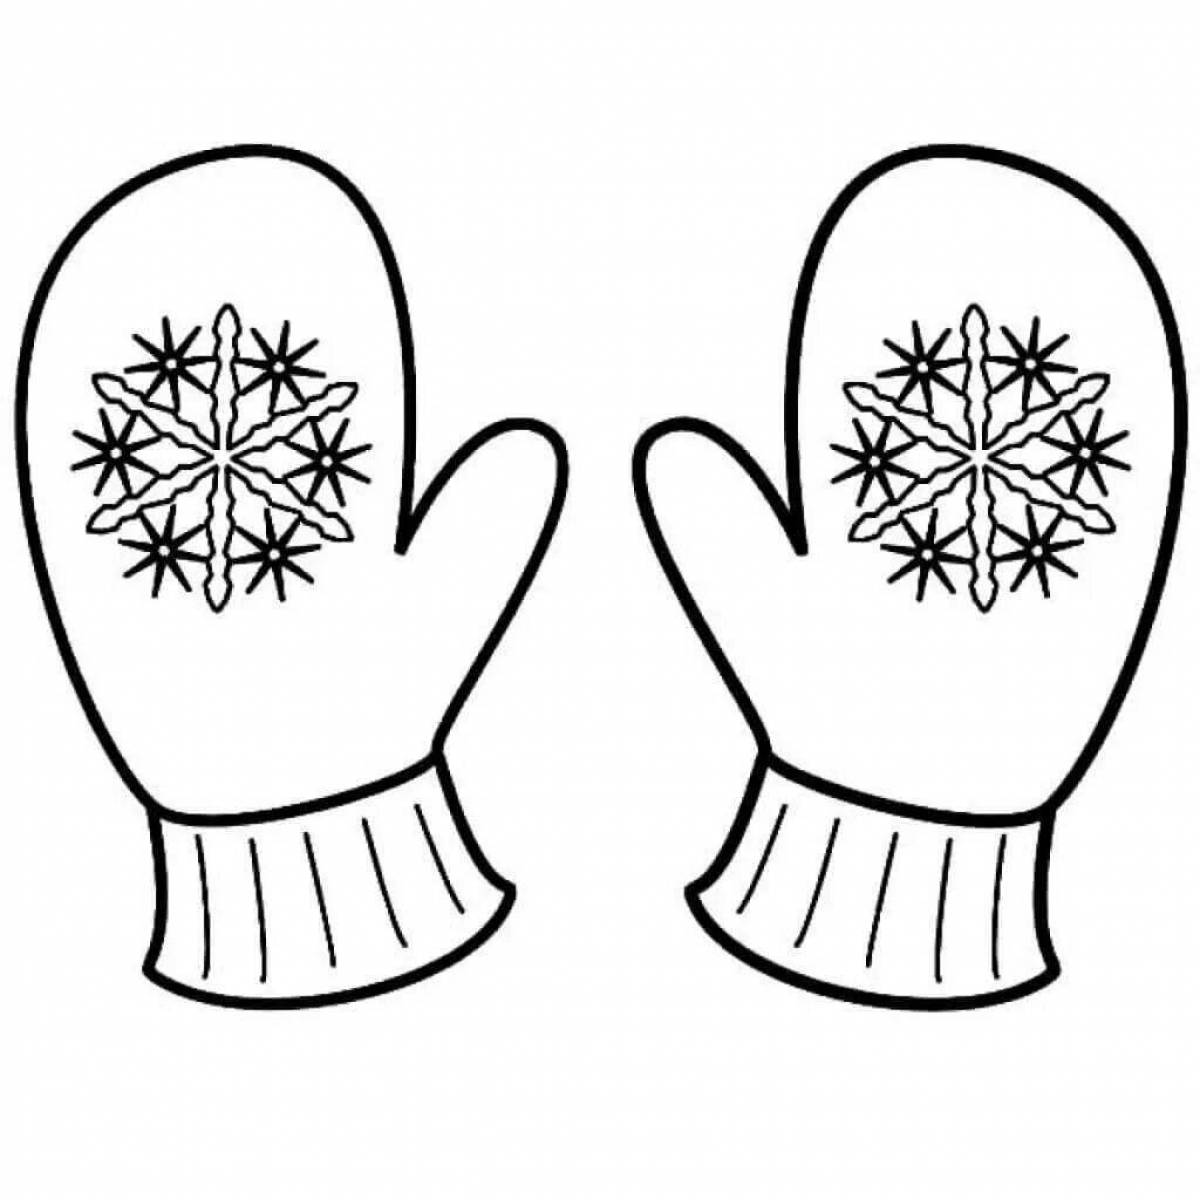 Fun mitten coloring book for 4-5 year olds